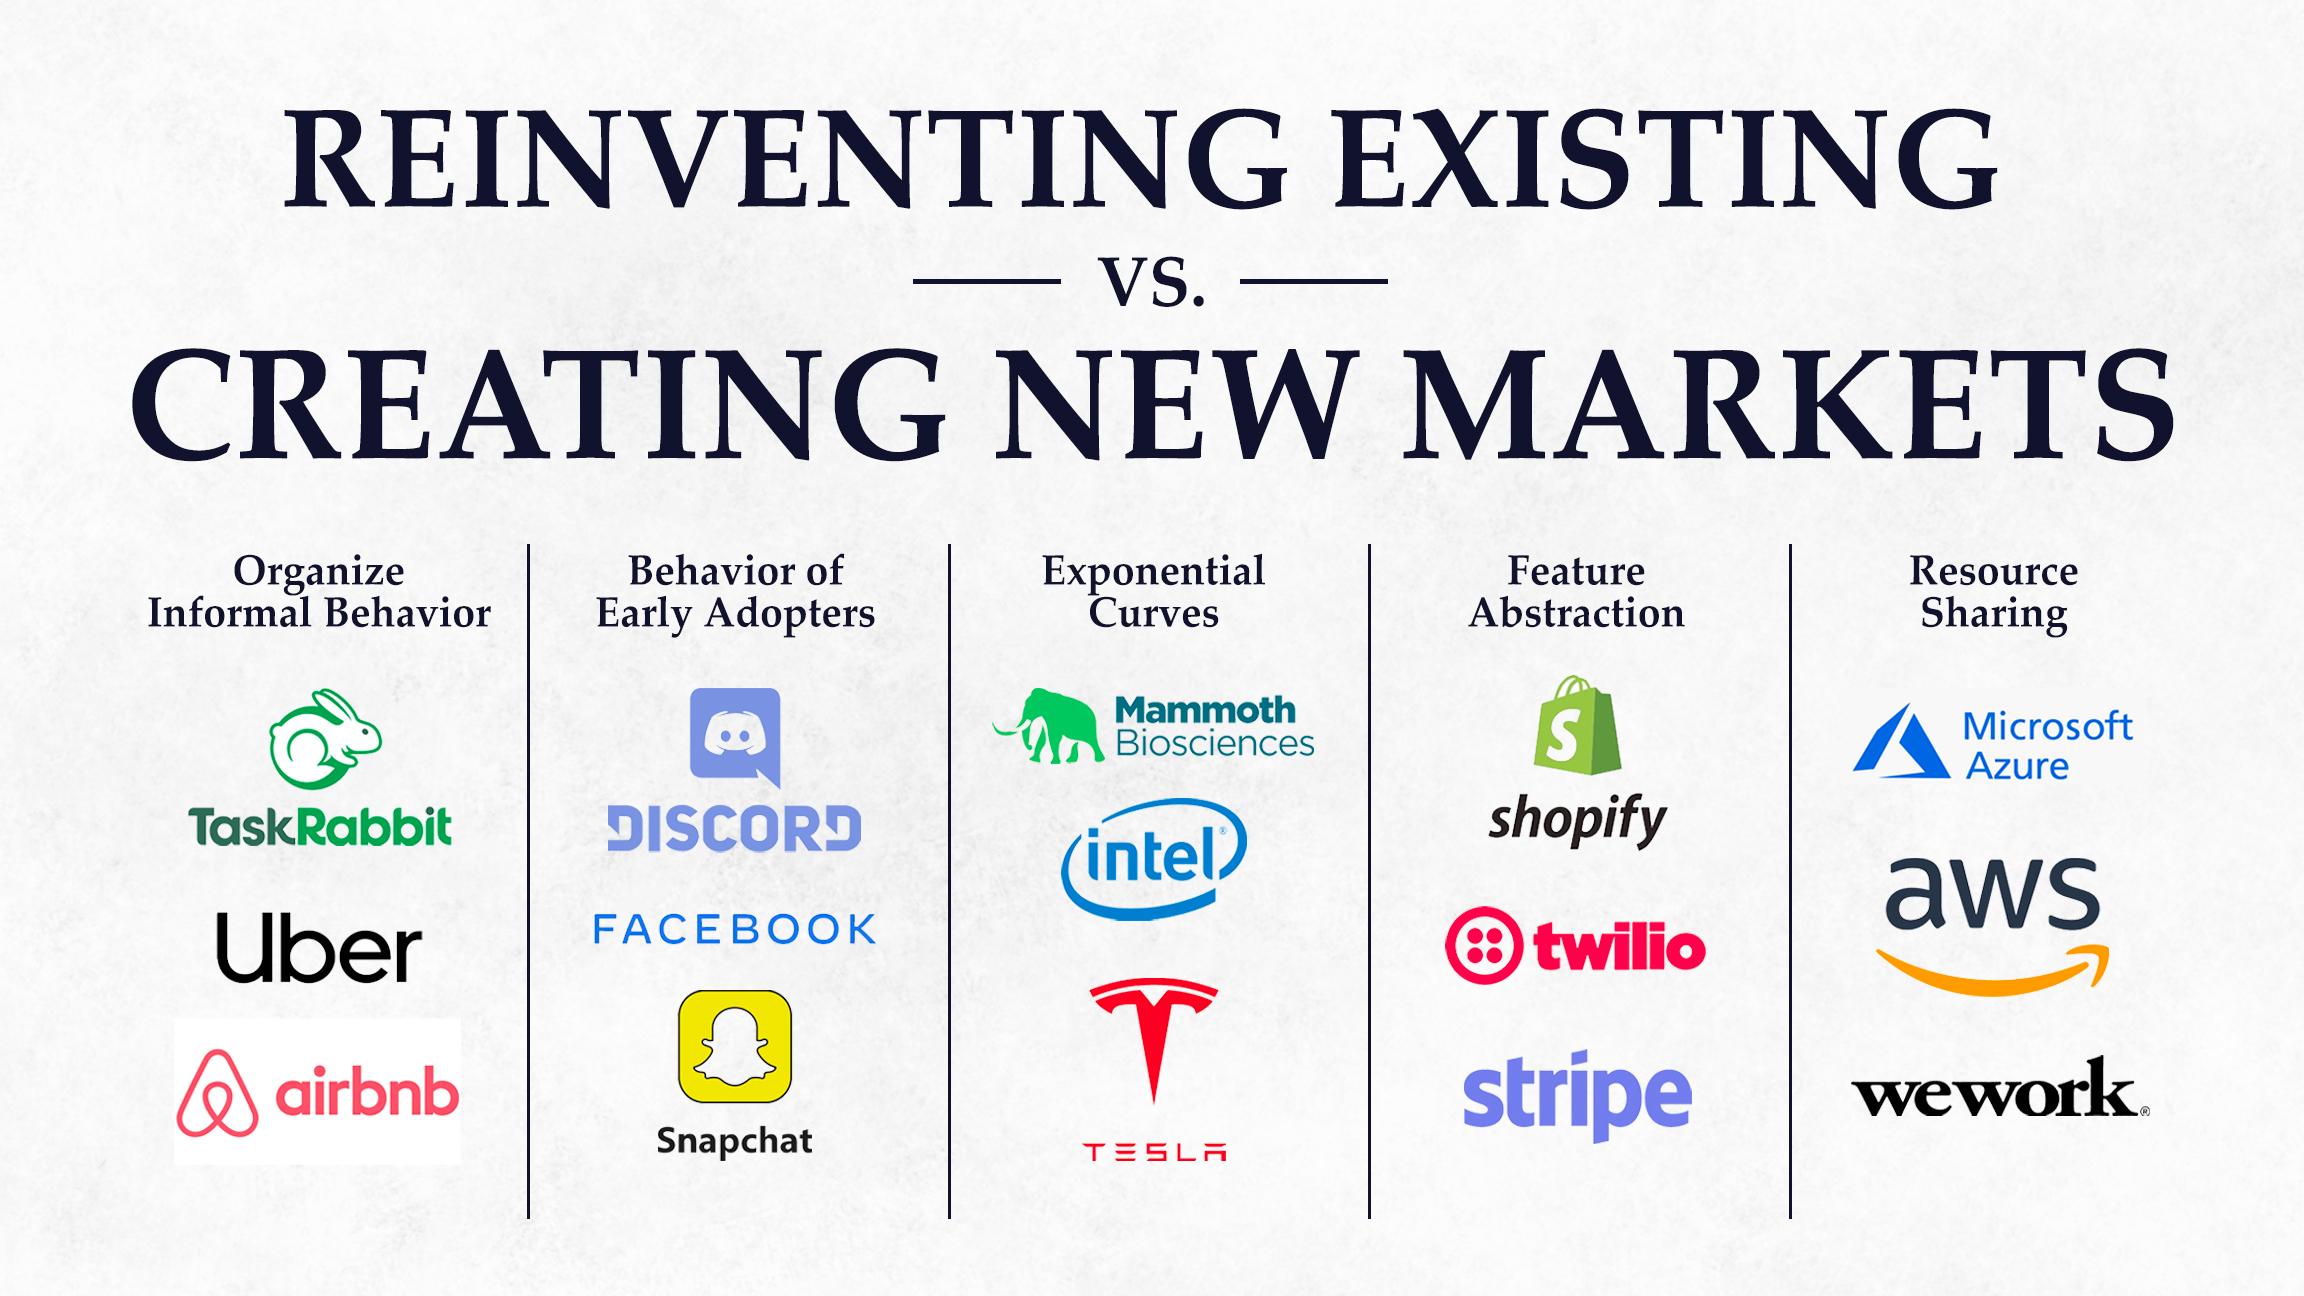 Reinventing Existing vs. Creating New Markets